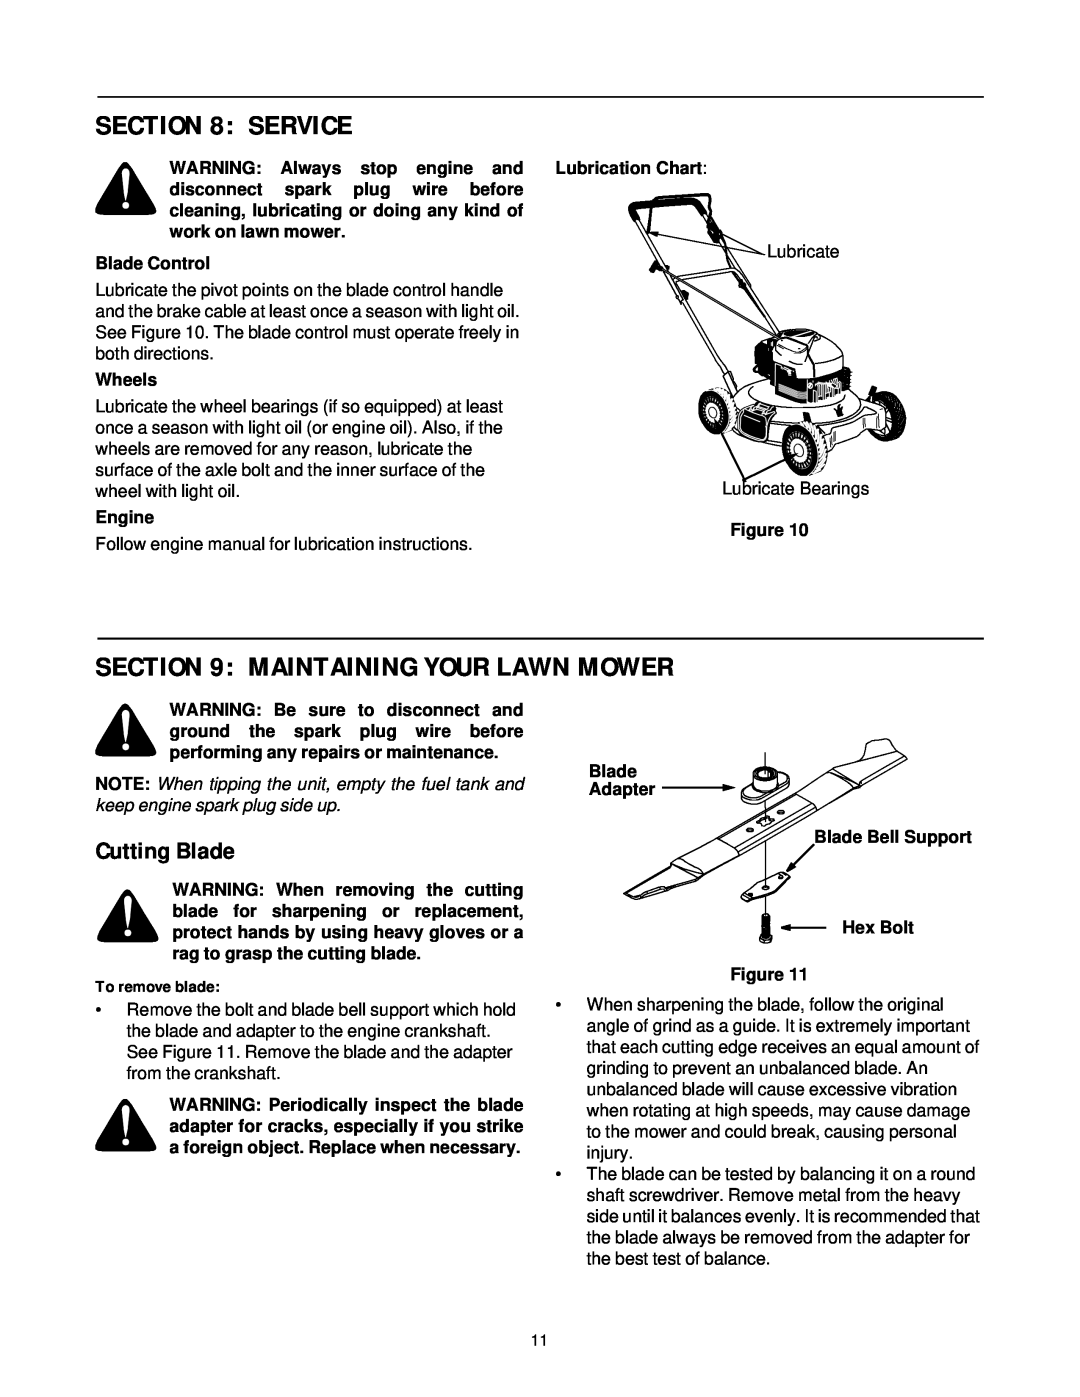 White LC-40, LC-106 Service, Maintaining Your Lawn Mower, Cutting Blade, To remove blade, Blade Control, Wheels, Engine 